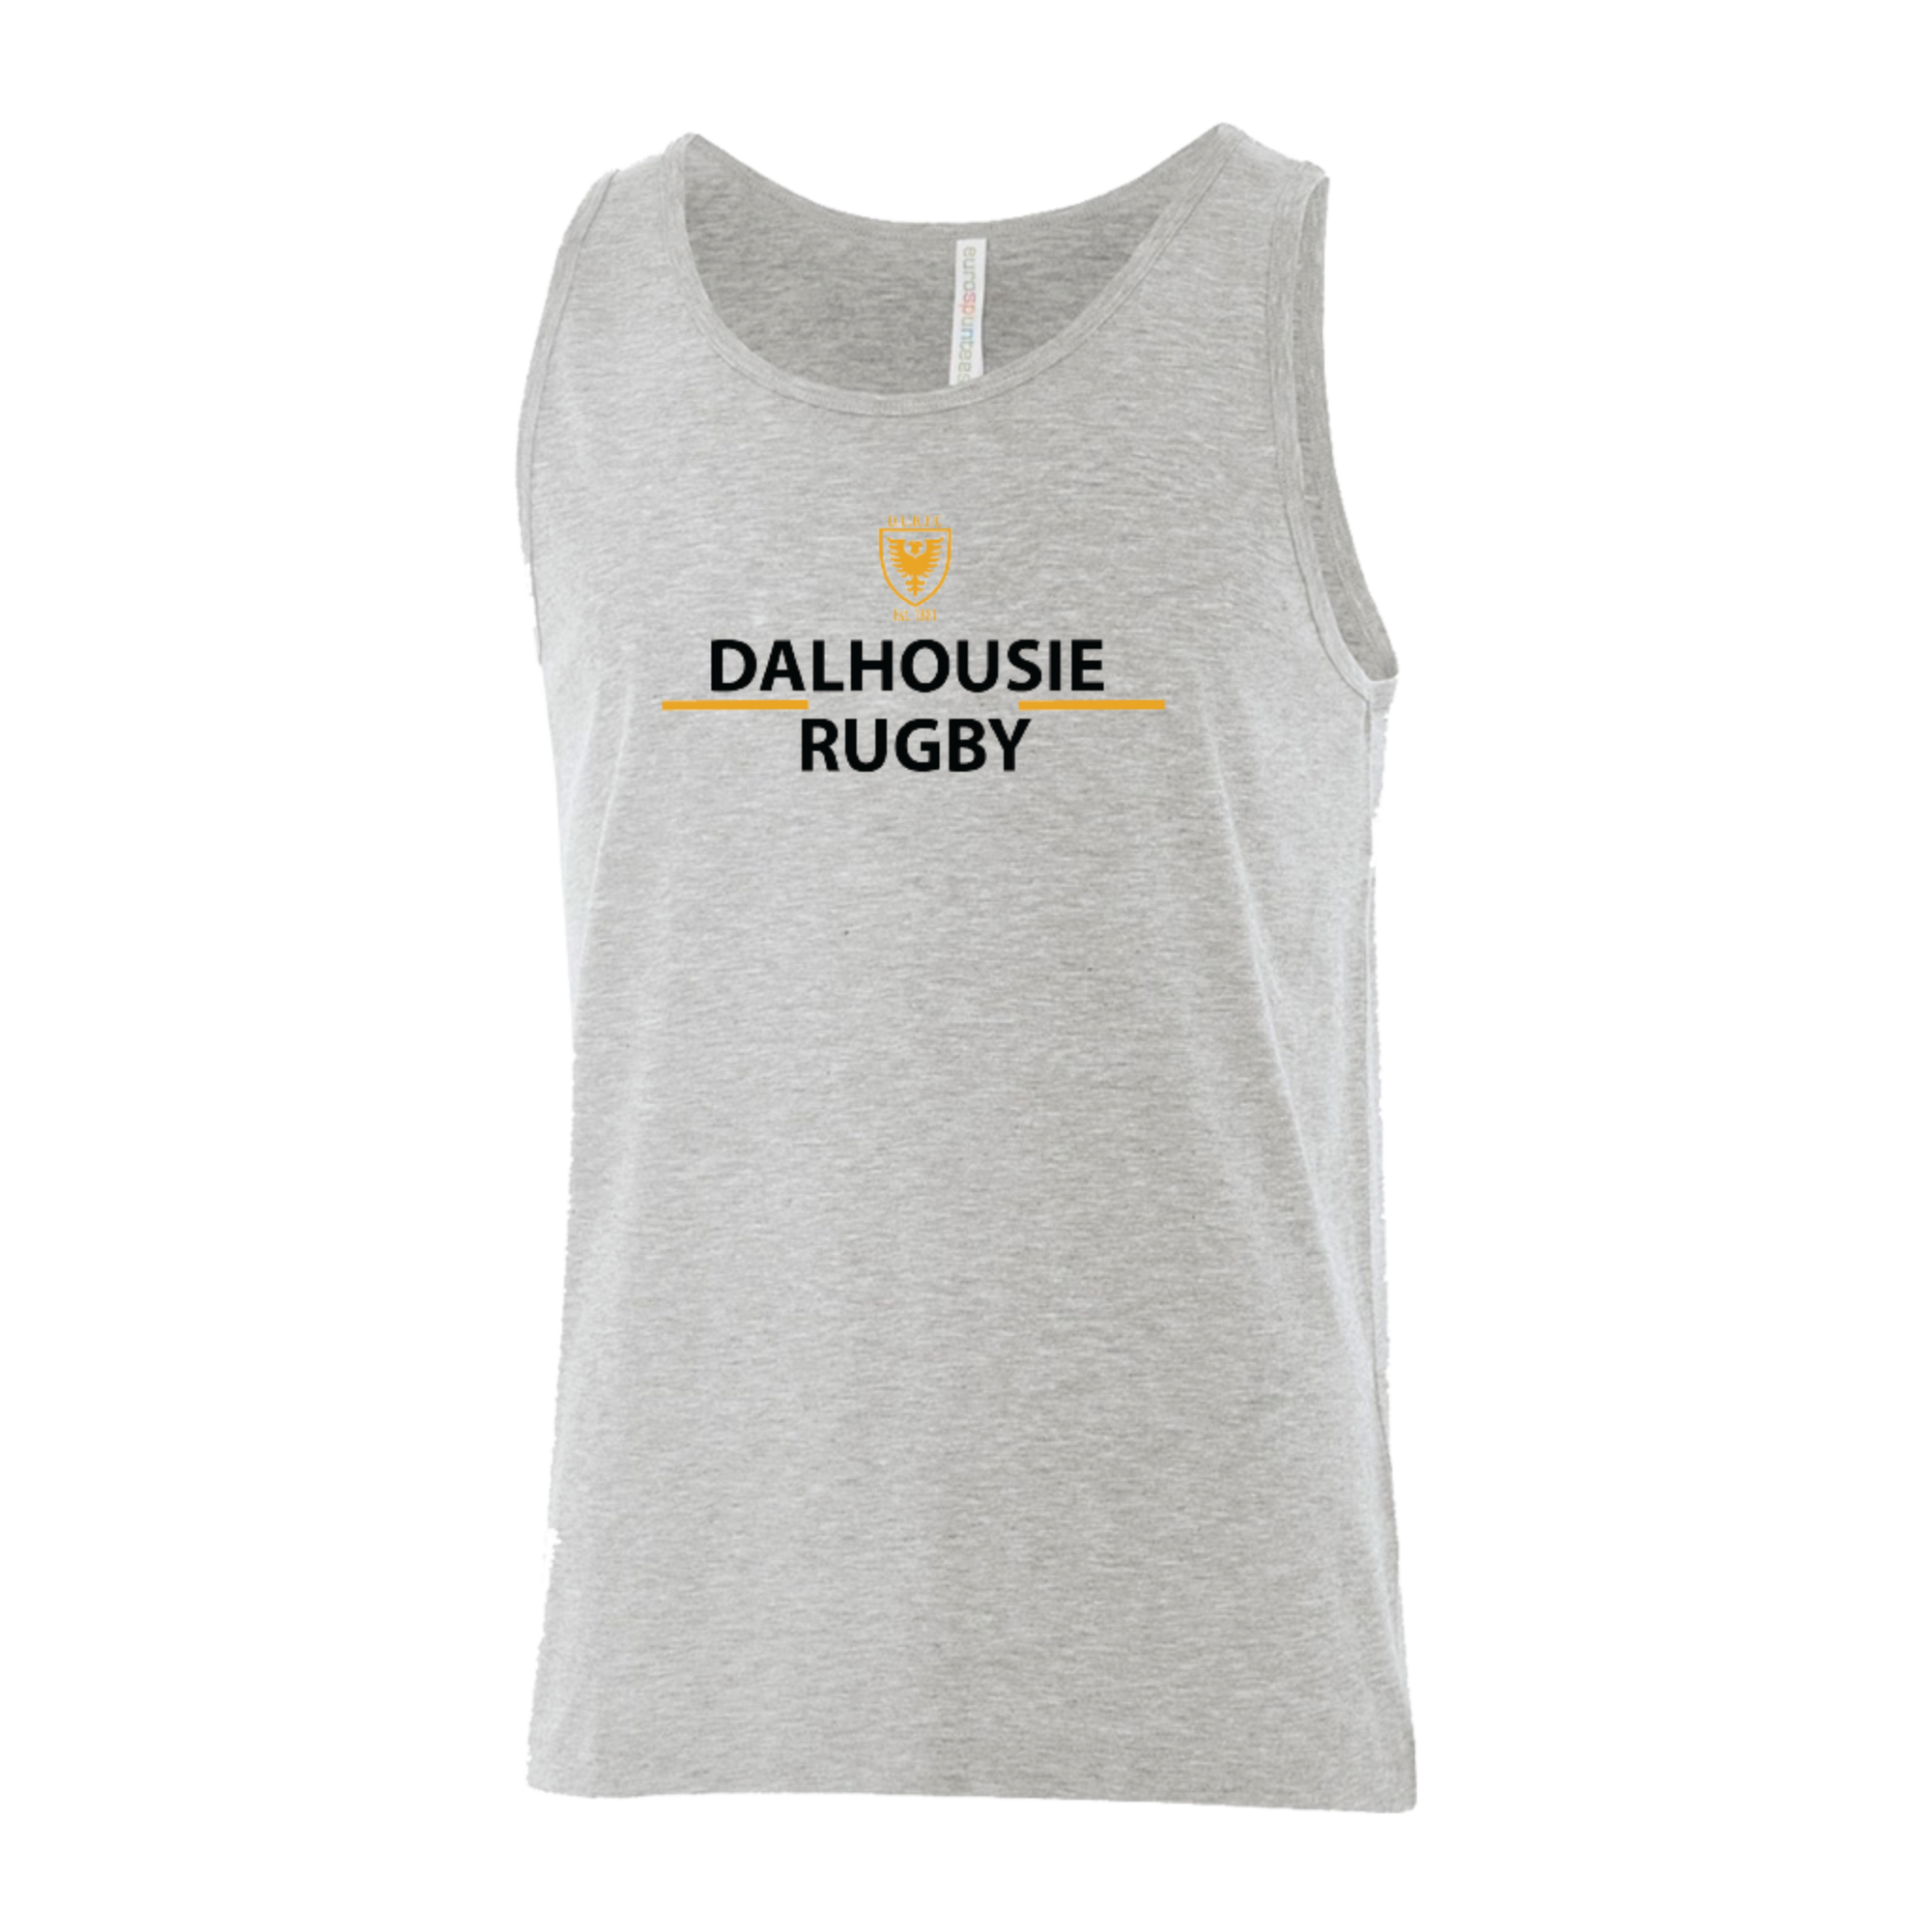 DURFC Dal Rugby Graphic Tank - Women's - www.therugbyshop.com www.therugbyshop.com XIX Brands Tank DURFC Dal Rugby Graphic Tank - Women's